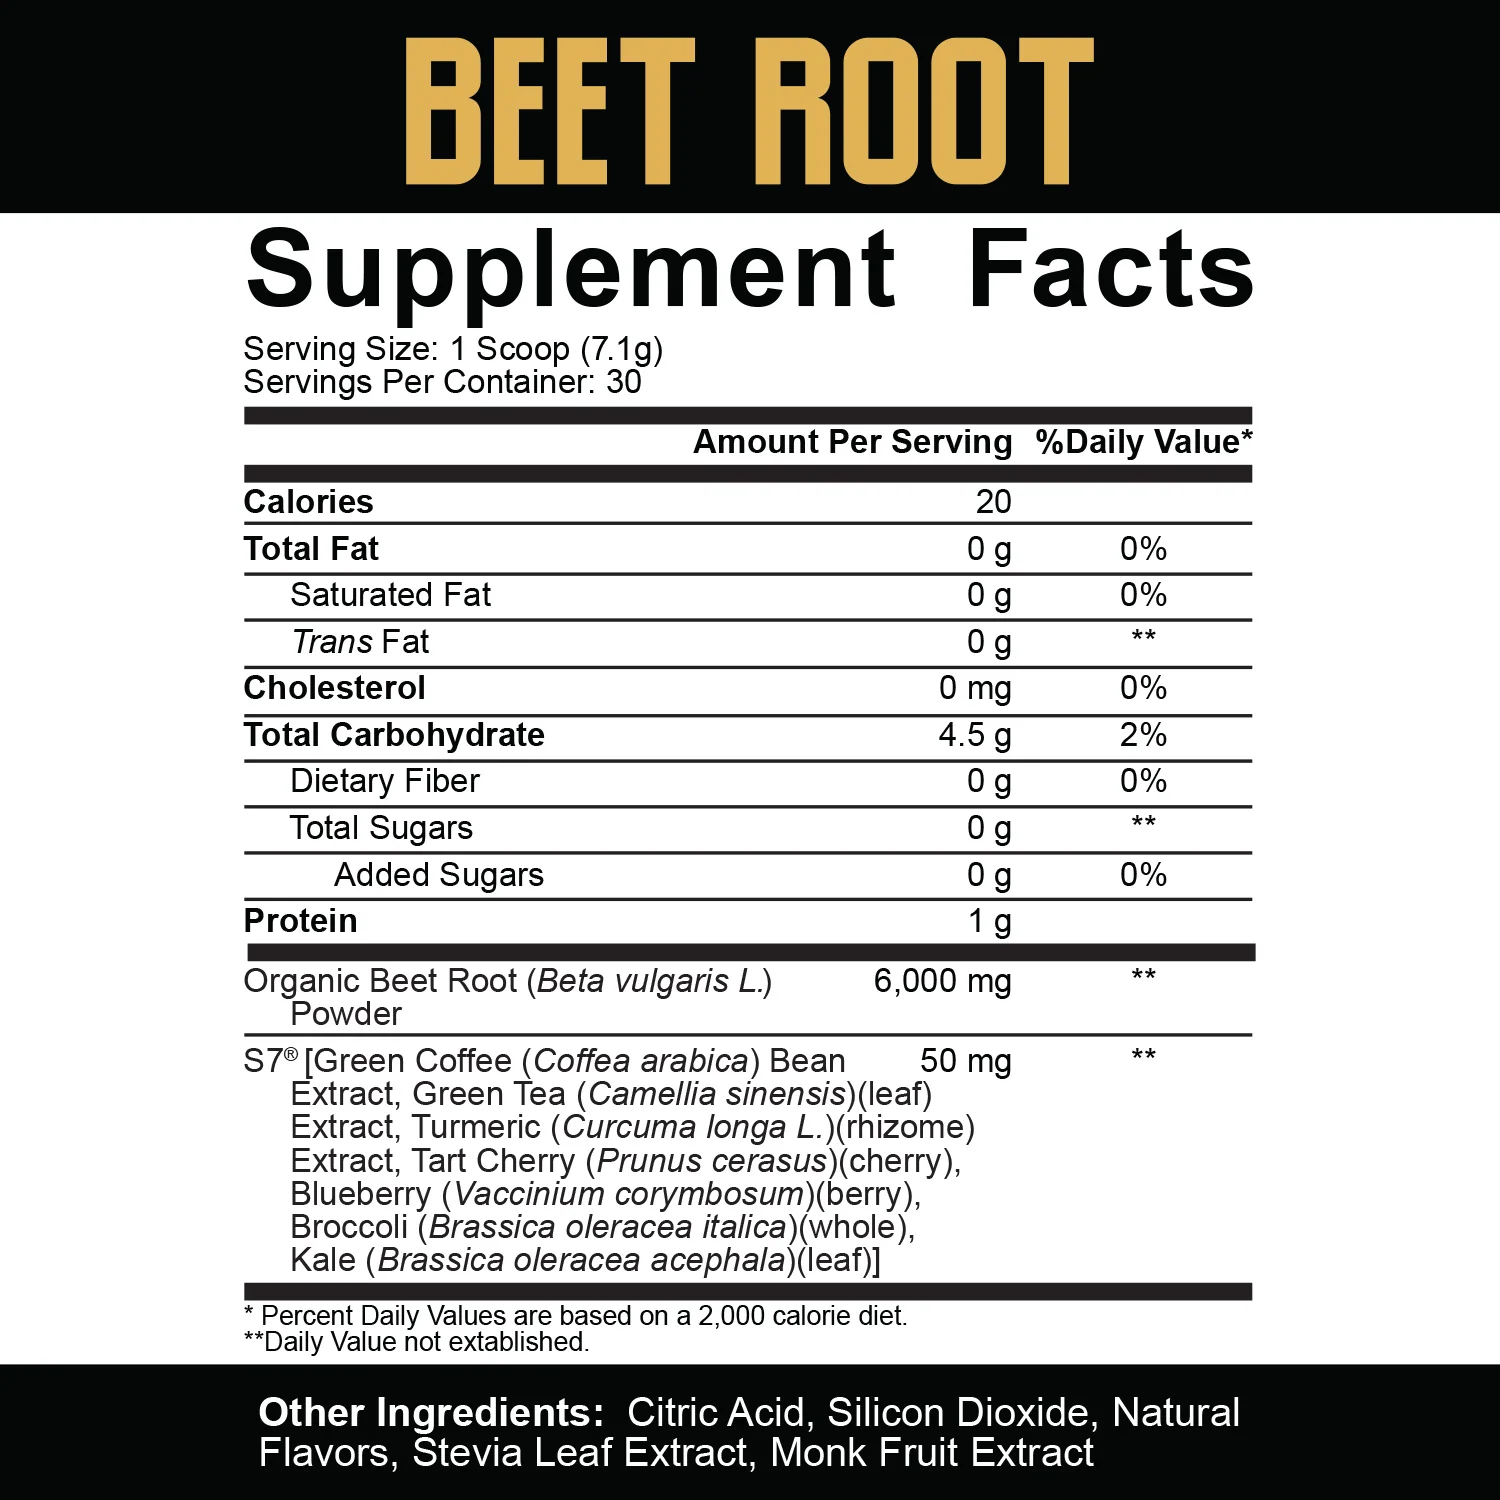 5% CORE BEET ROOT - 313G DOSE